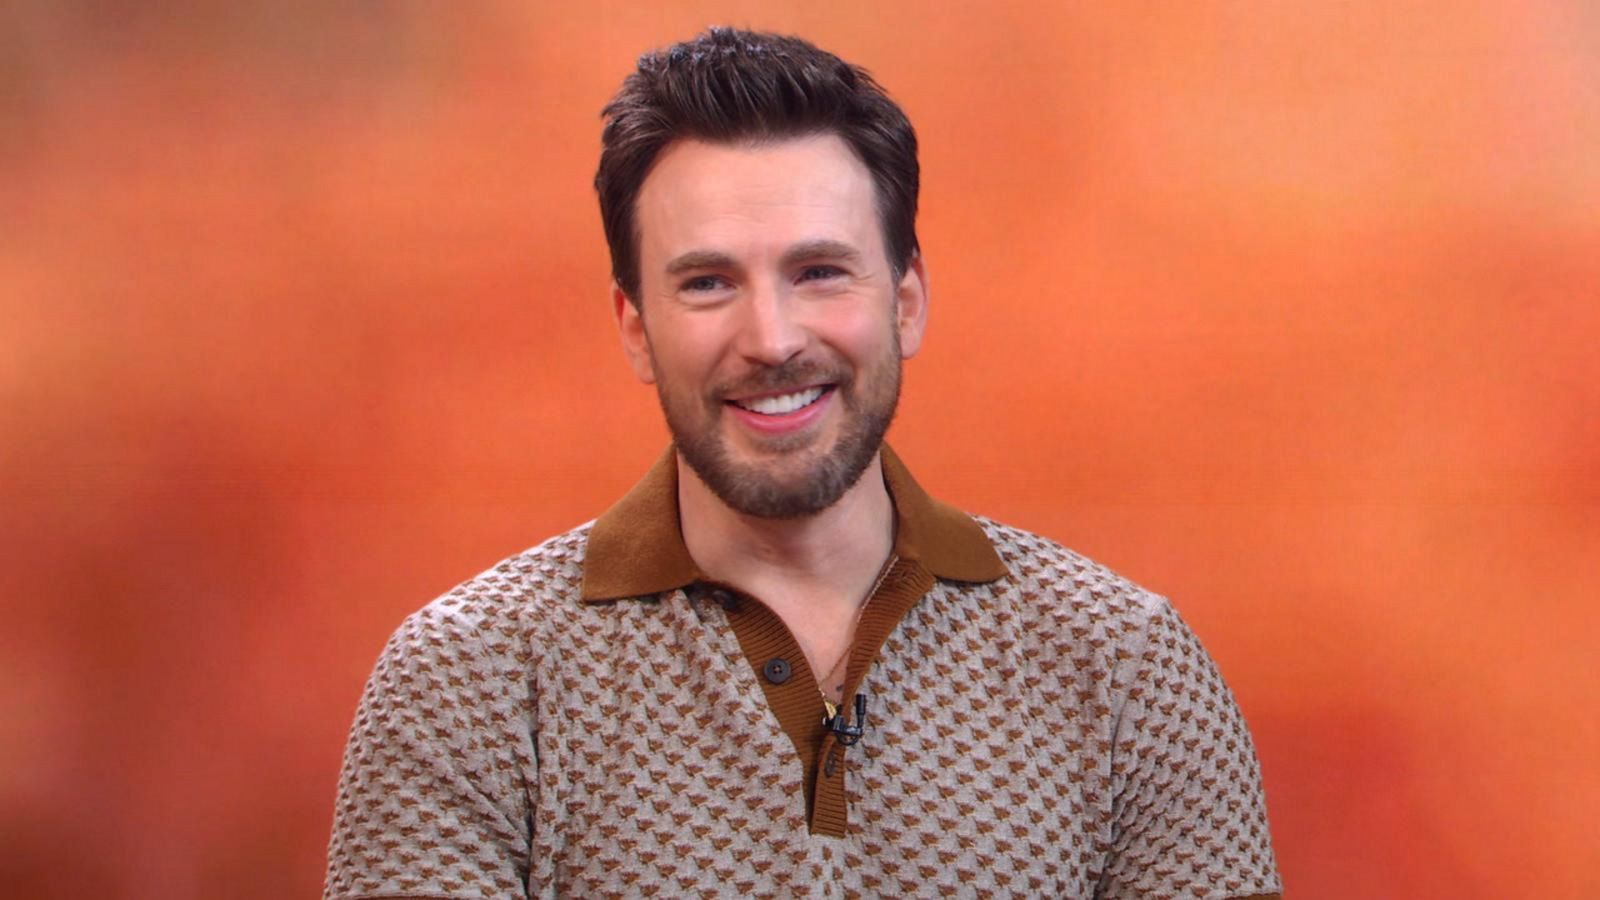 Chris Evans talks about new movie, ‘Ghosted’ Good Morning America